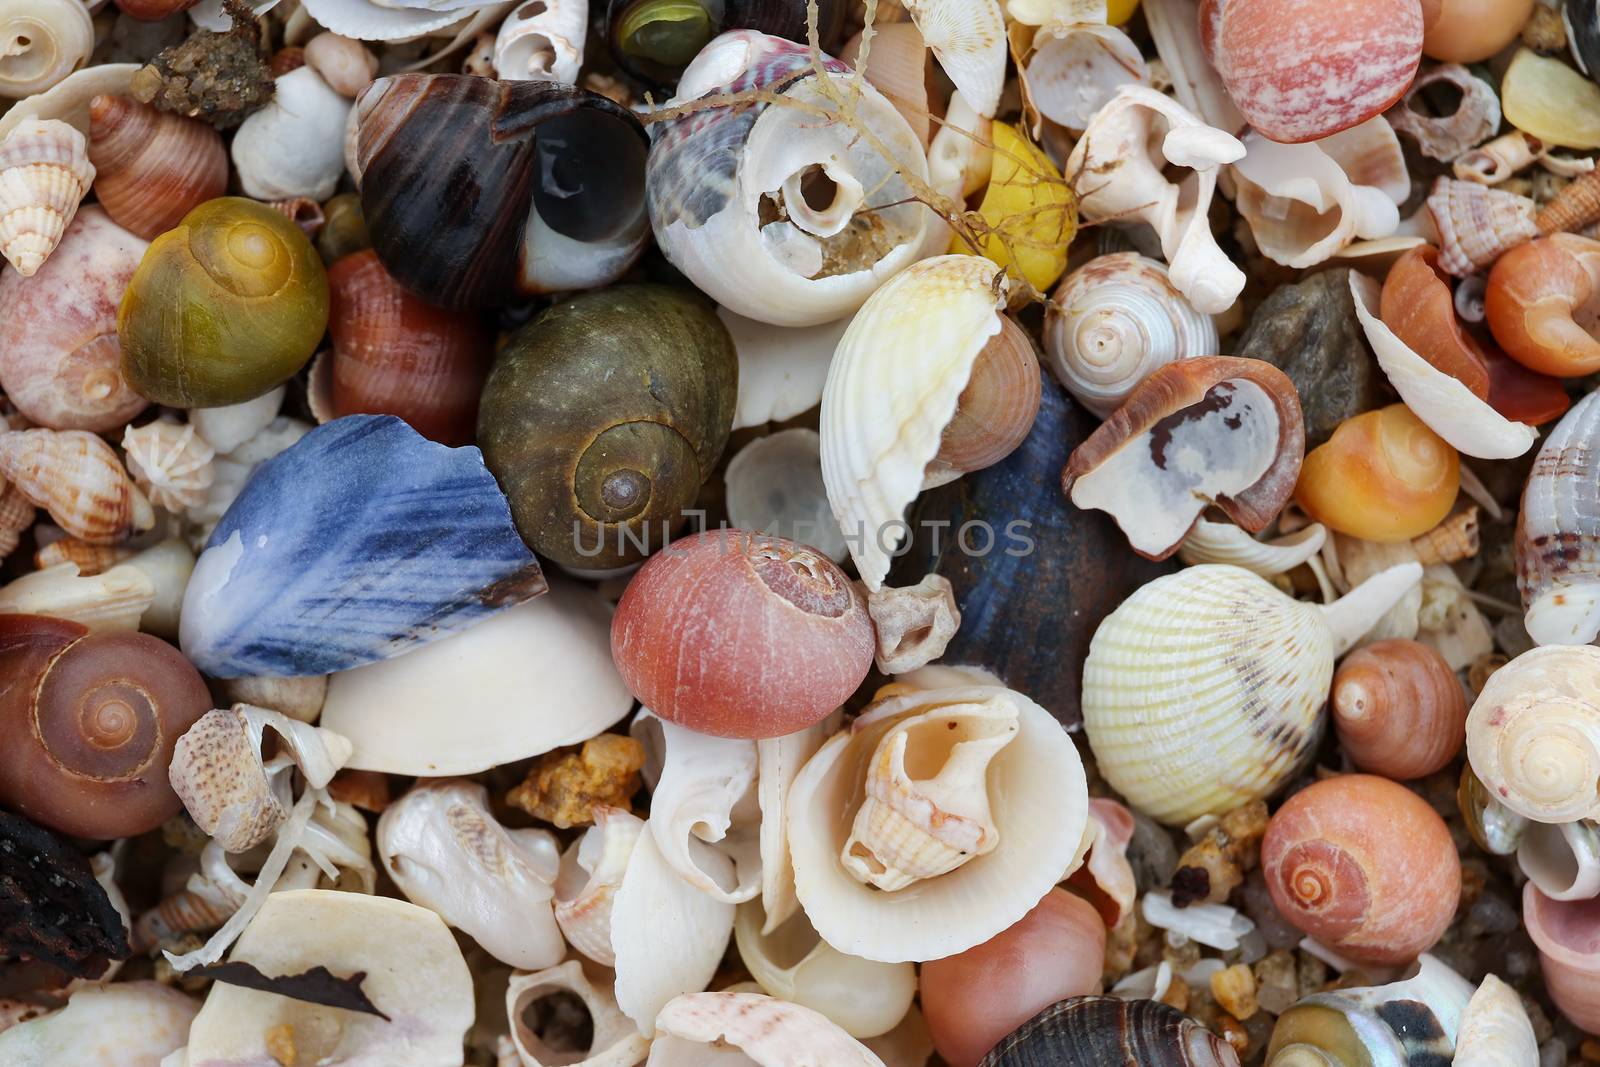 Pile of the shells of molluscs on the beach at low tide